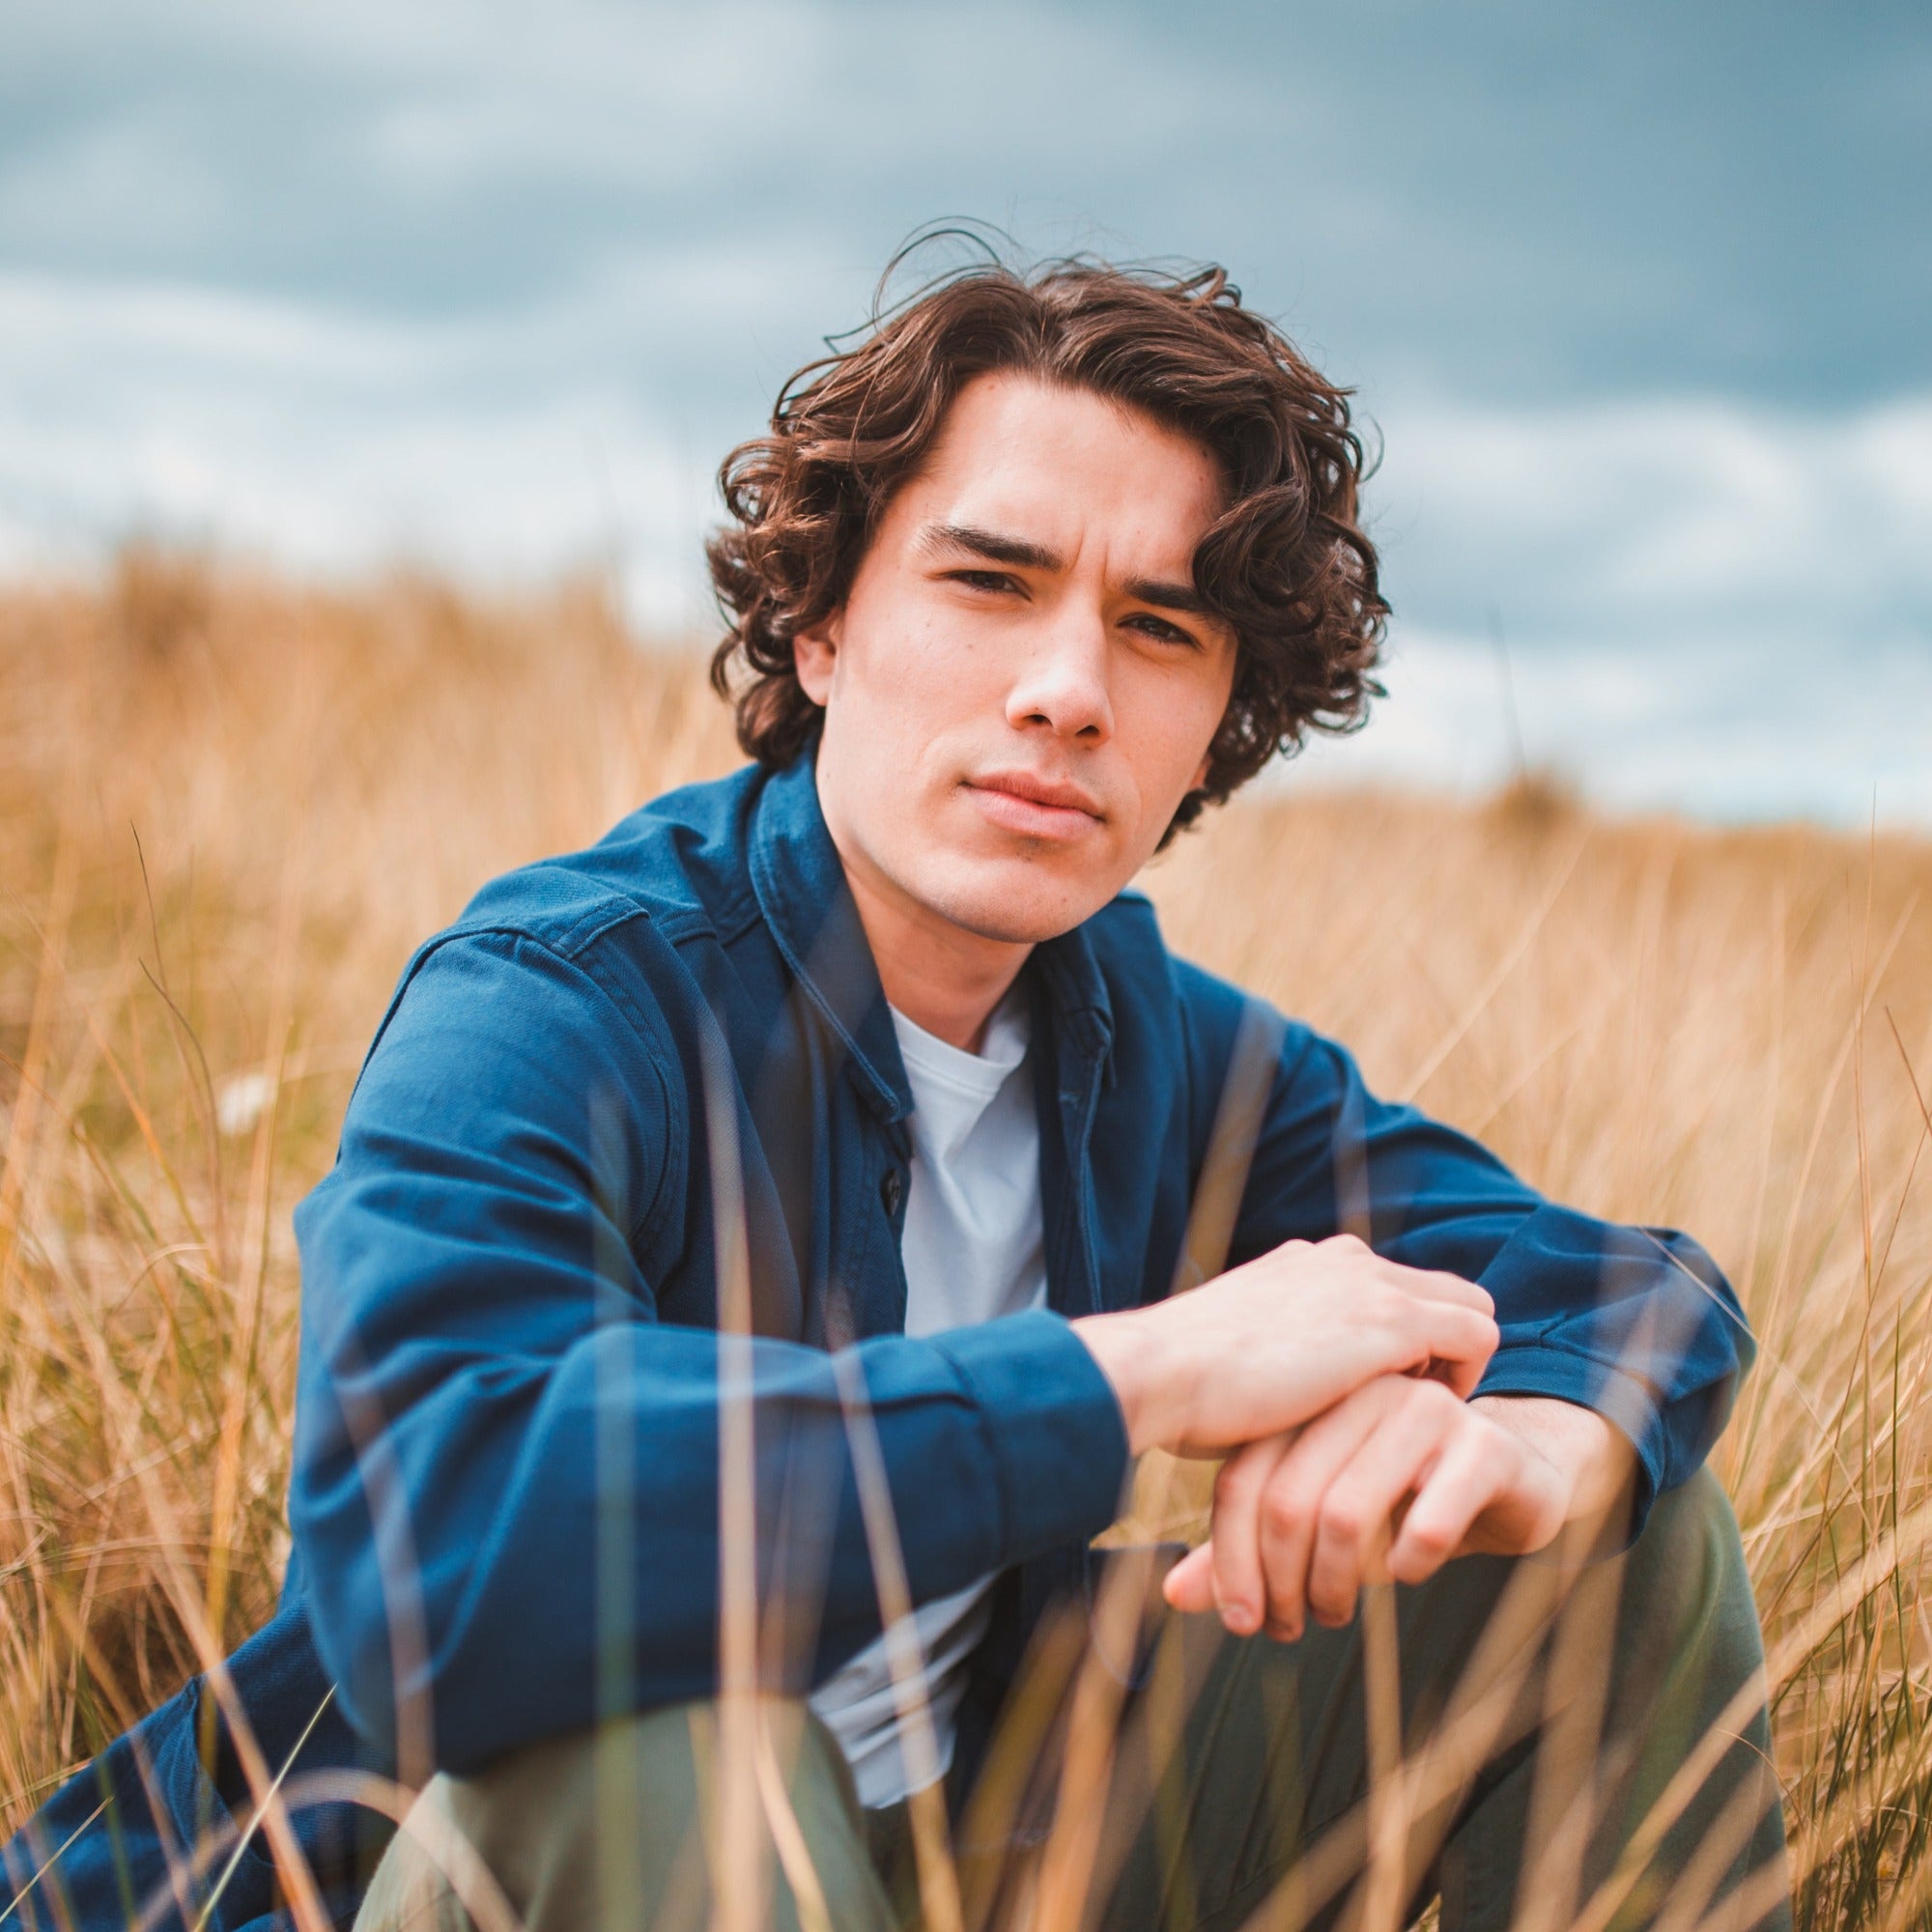 Male model sitting in sand dunes and grass at the beach. He has mid length curly brunette hair and has used Moo and Yoo Sea Salt Spray to style. He is looking directly at the camera and is wearing a blue shirt over a white t shirt.